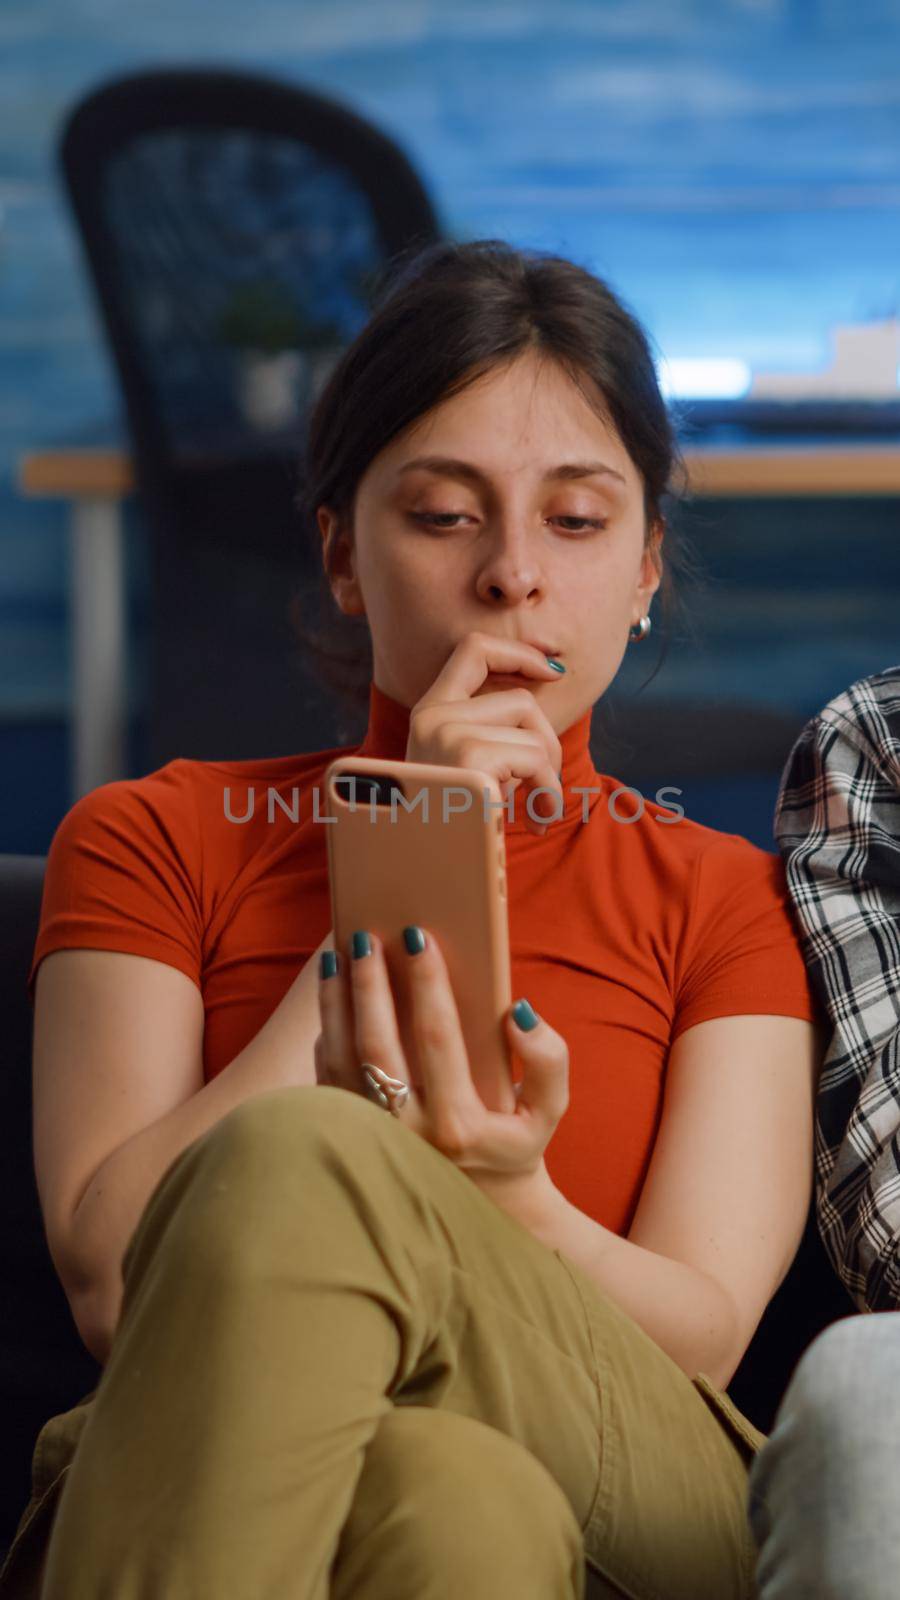 Married interracial couple using smartphone at home. Multi ethnic partners talking while looking at modern device and sitting on couch in living room. Mixed race people with technology